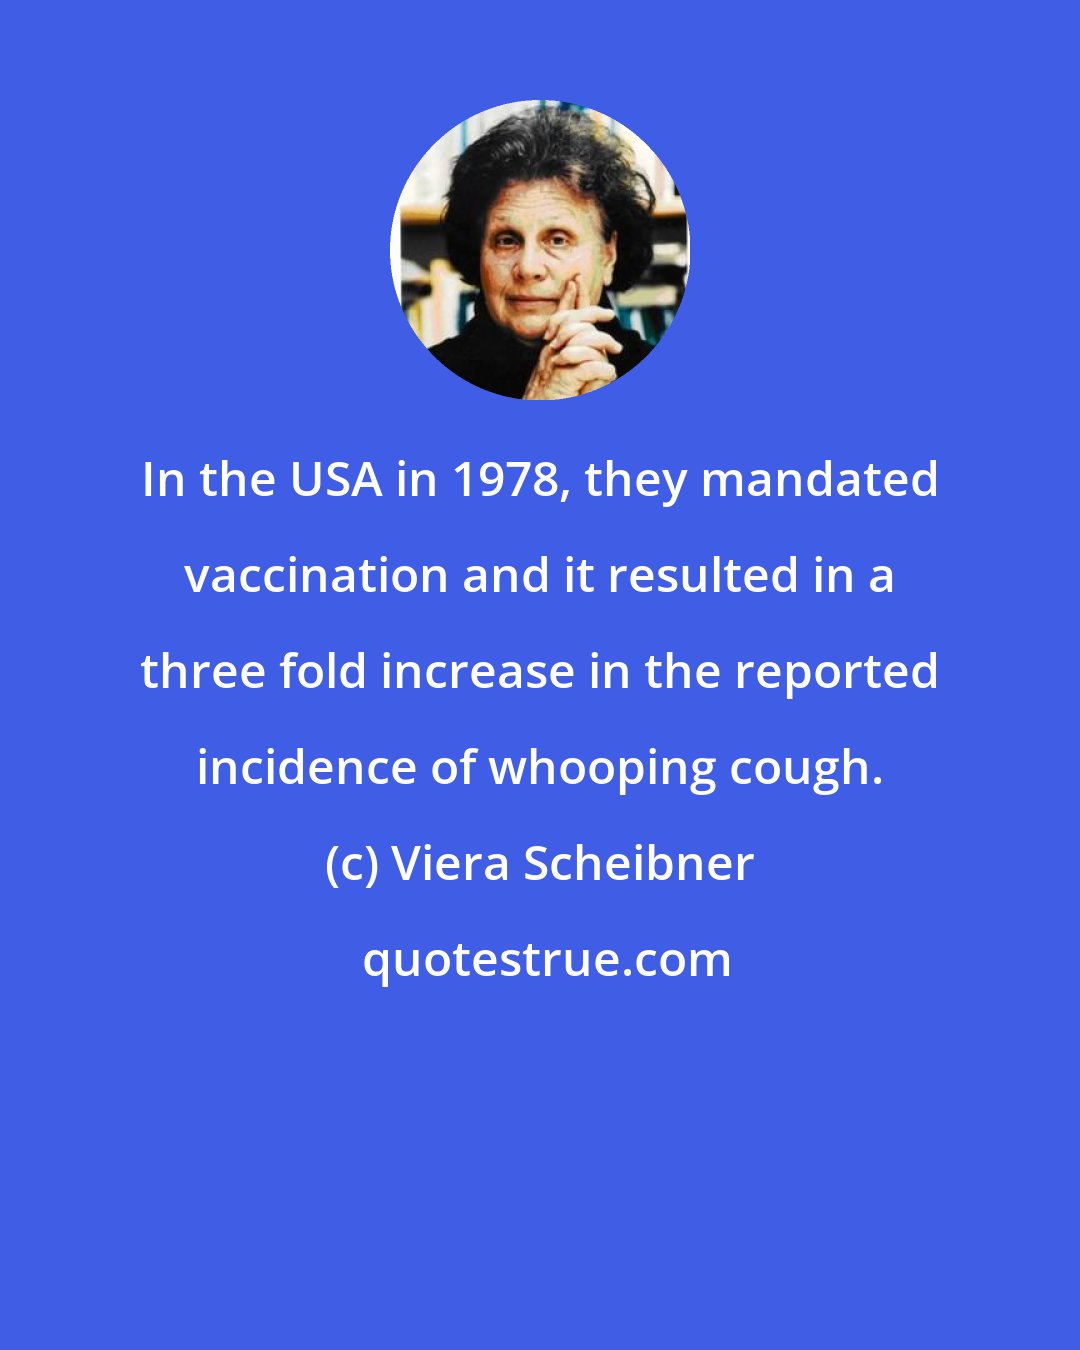 Viera Scheibner: In the USA in 1978, they mandated vaccination and it resulted in a three fold increase in the reported incidence of whooping cough.